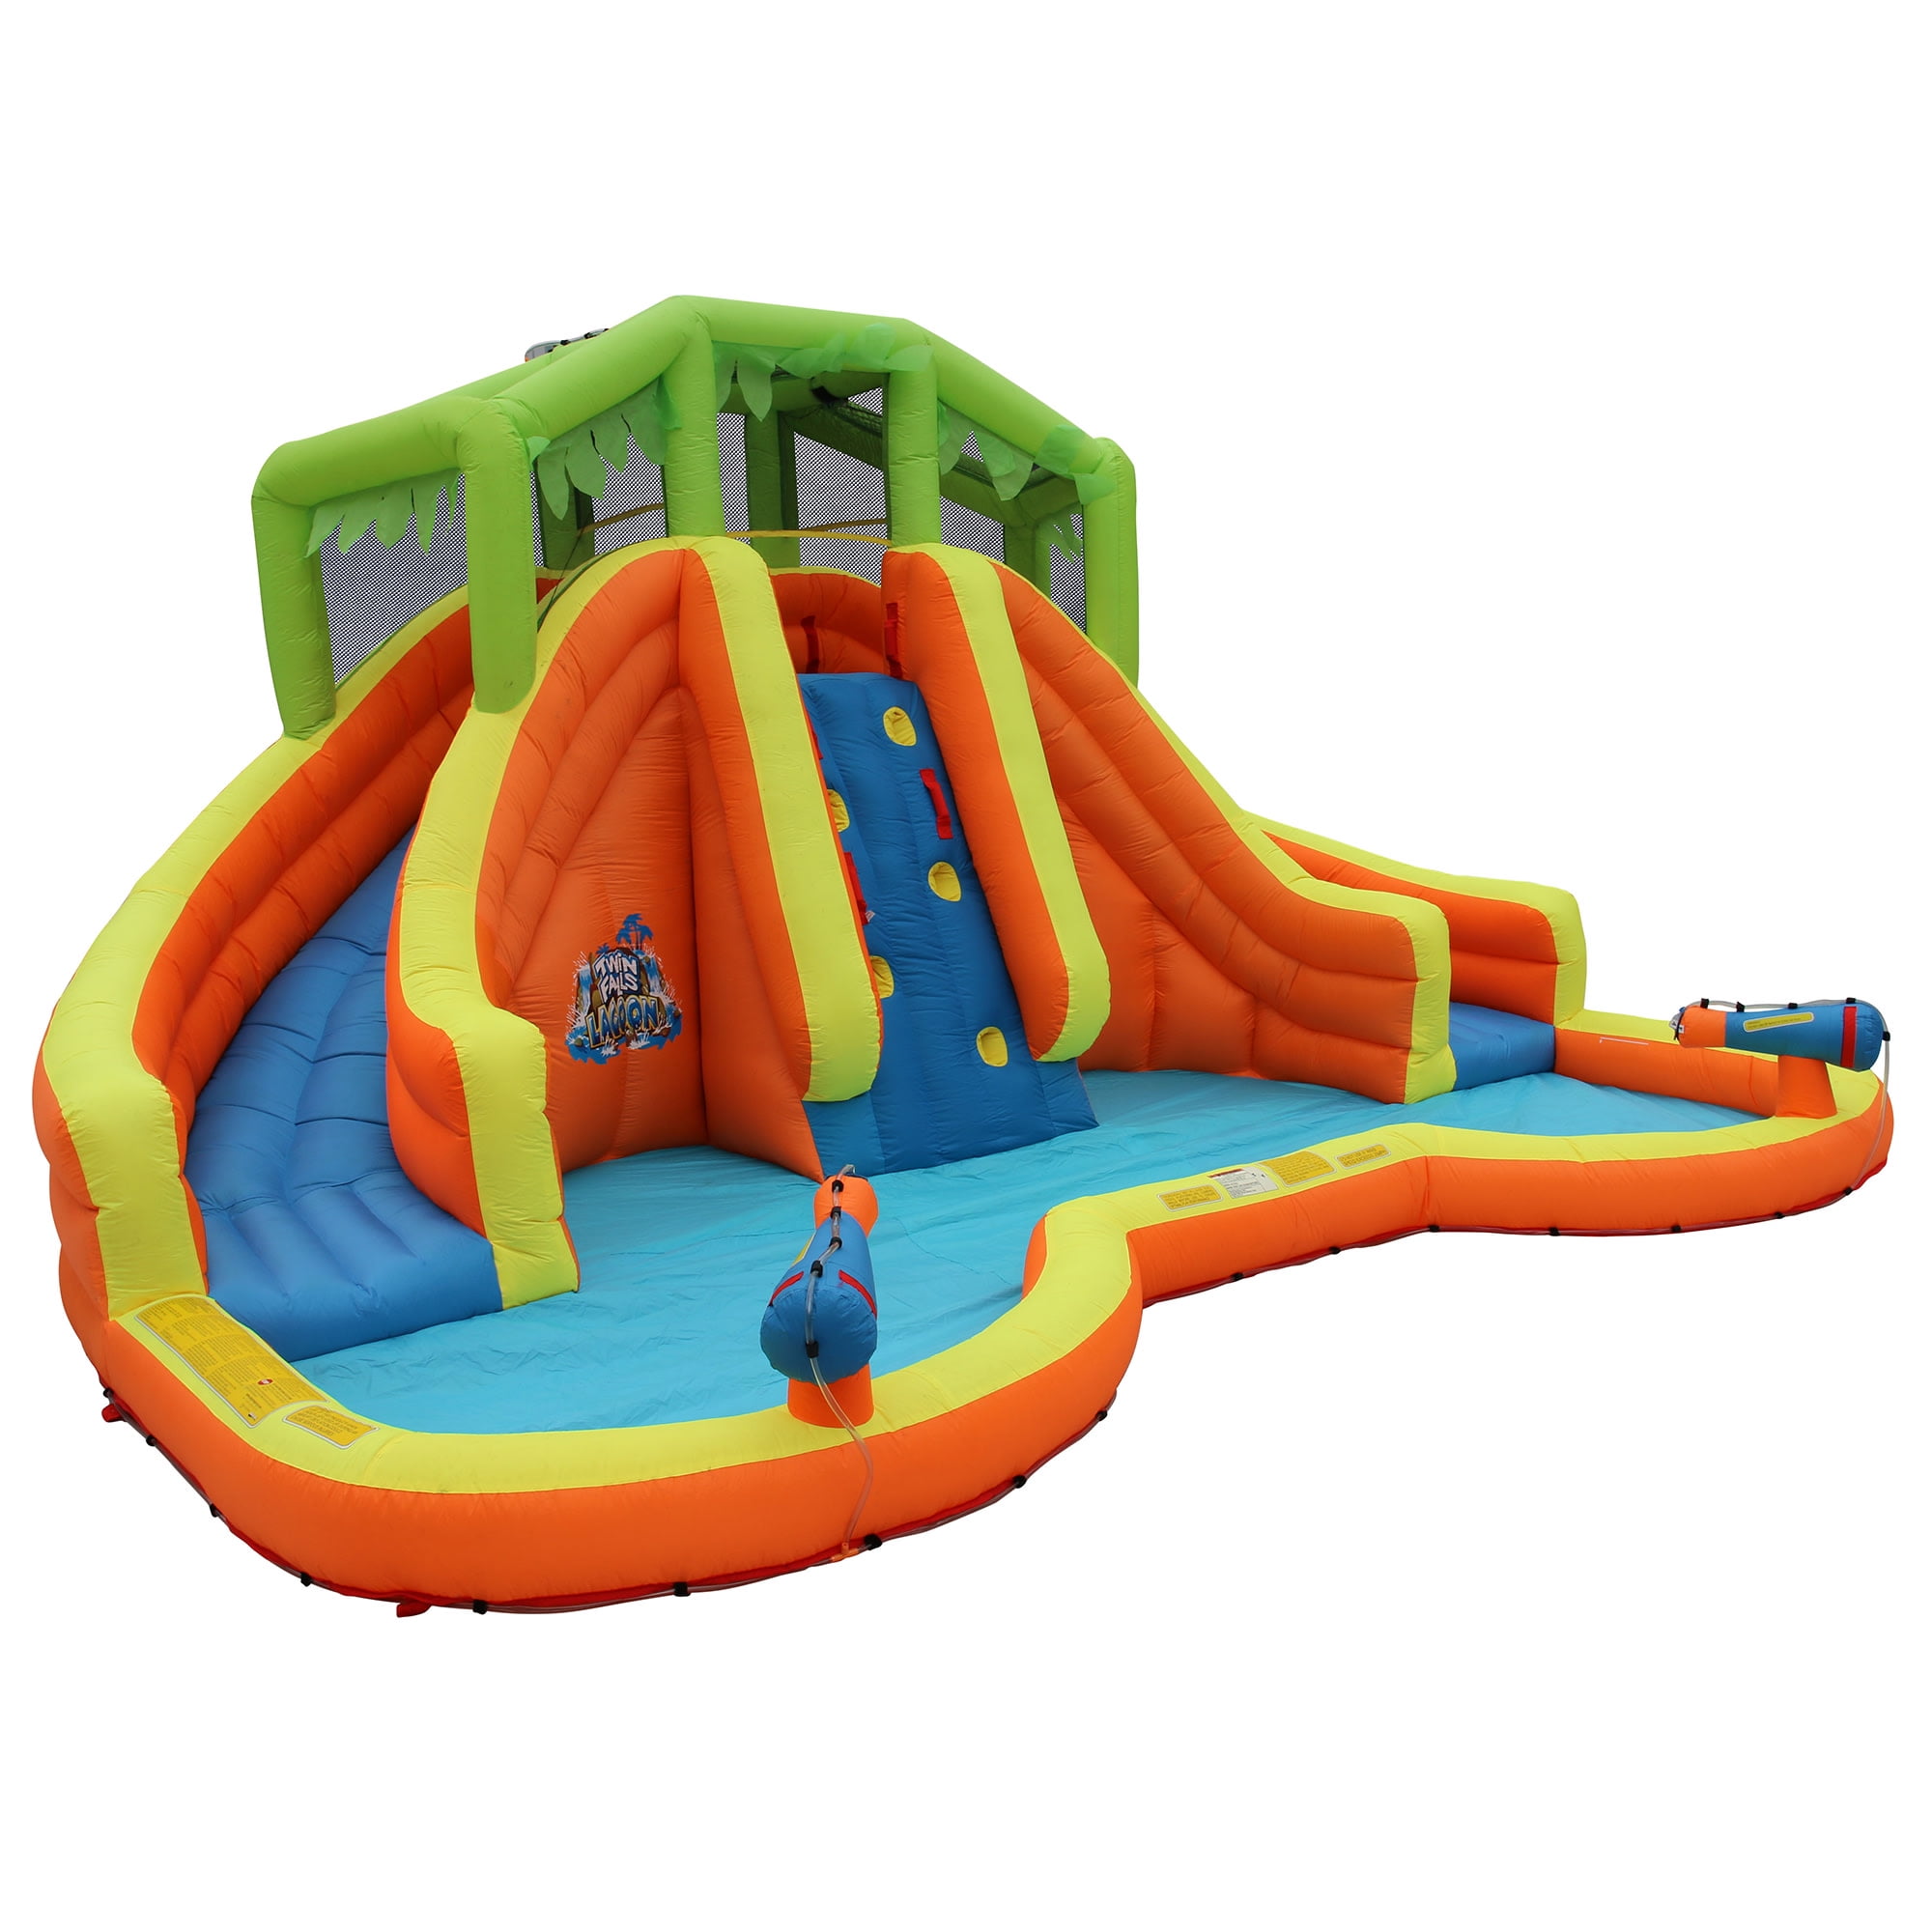 Banzai Twin Falls Kids Giant Colorful Outside Inflatable Water Park Bounce House for Children Ages 5 to 12 Years Old 